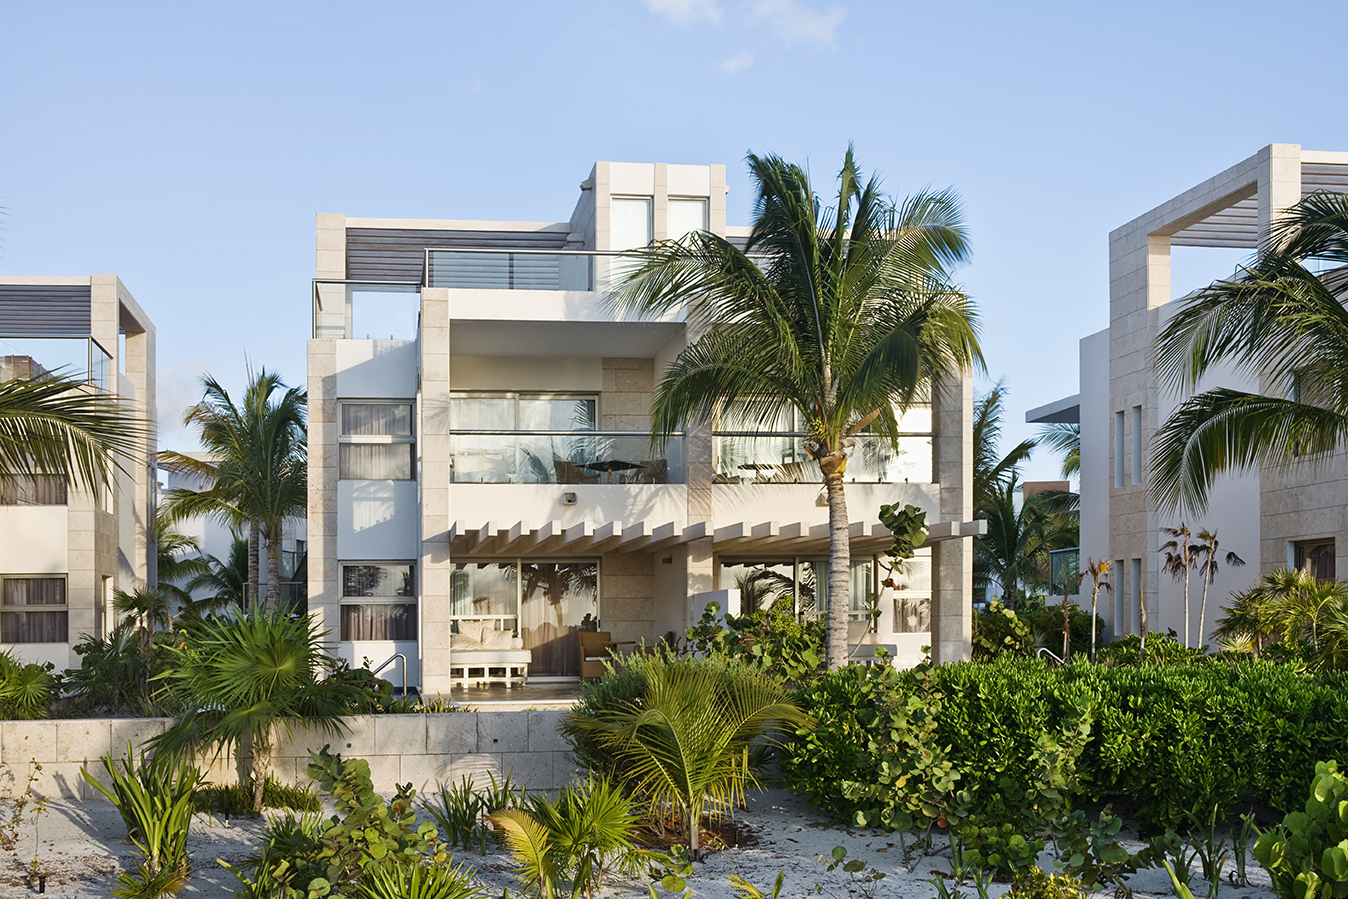 Casita suites exterior view with tropical surroundings